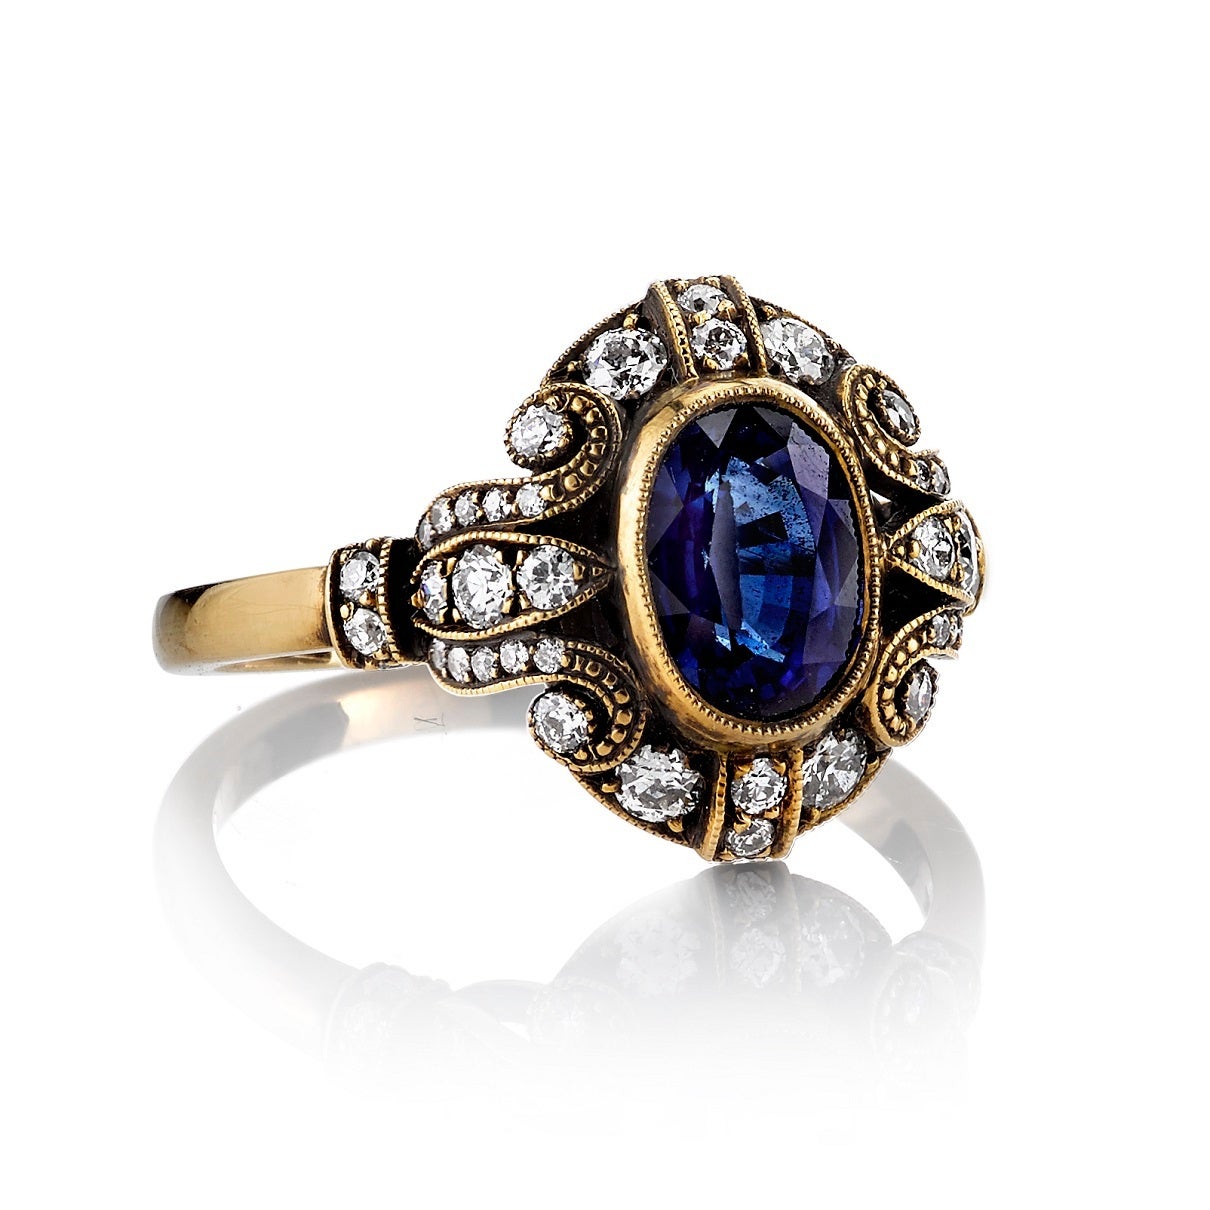 1.45ct Oval cut Sapphire diamond set in a handcrafted 18K oxidized yellow gold mounting.